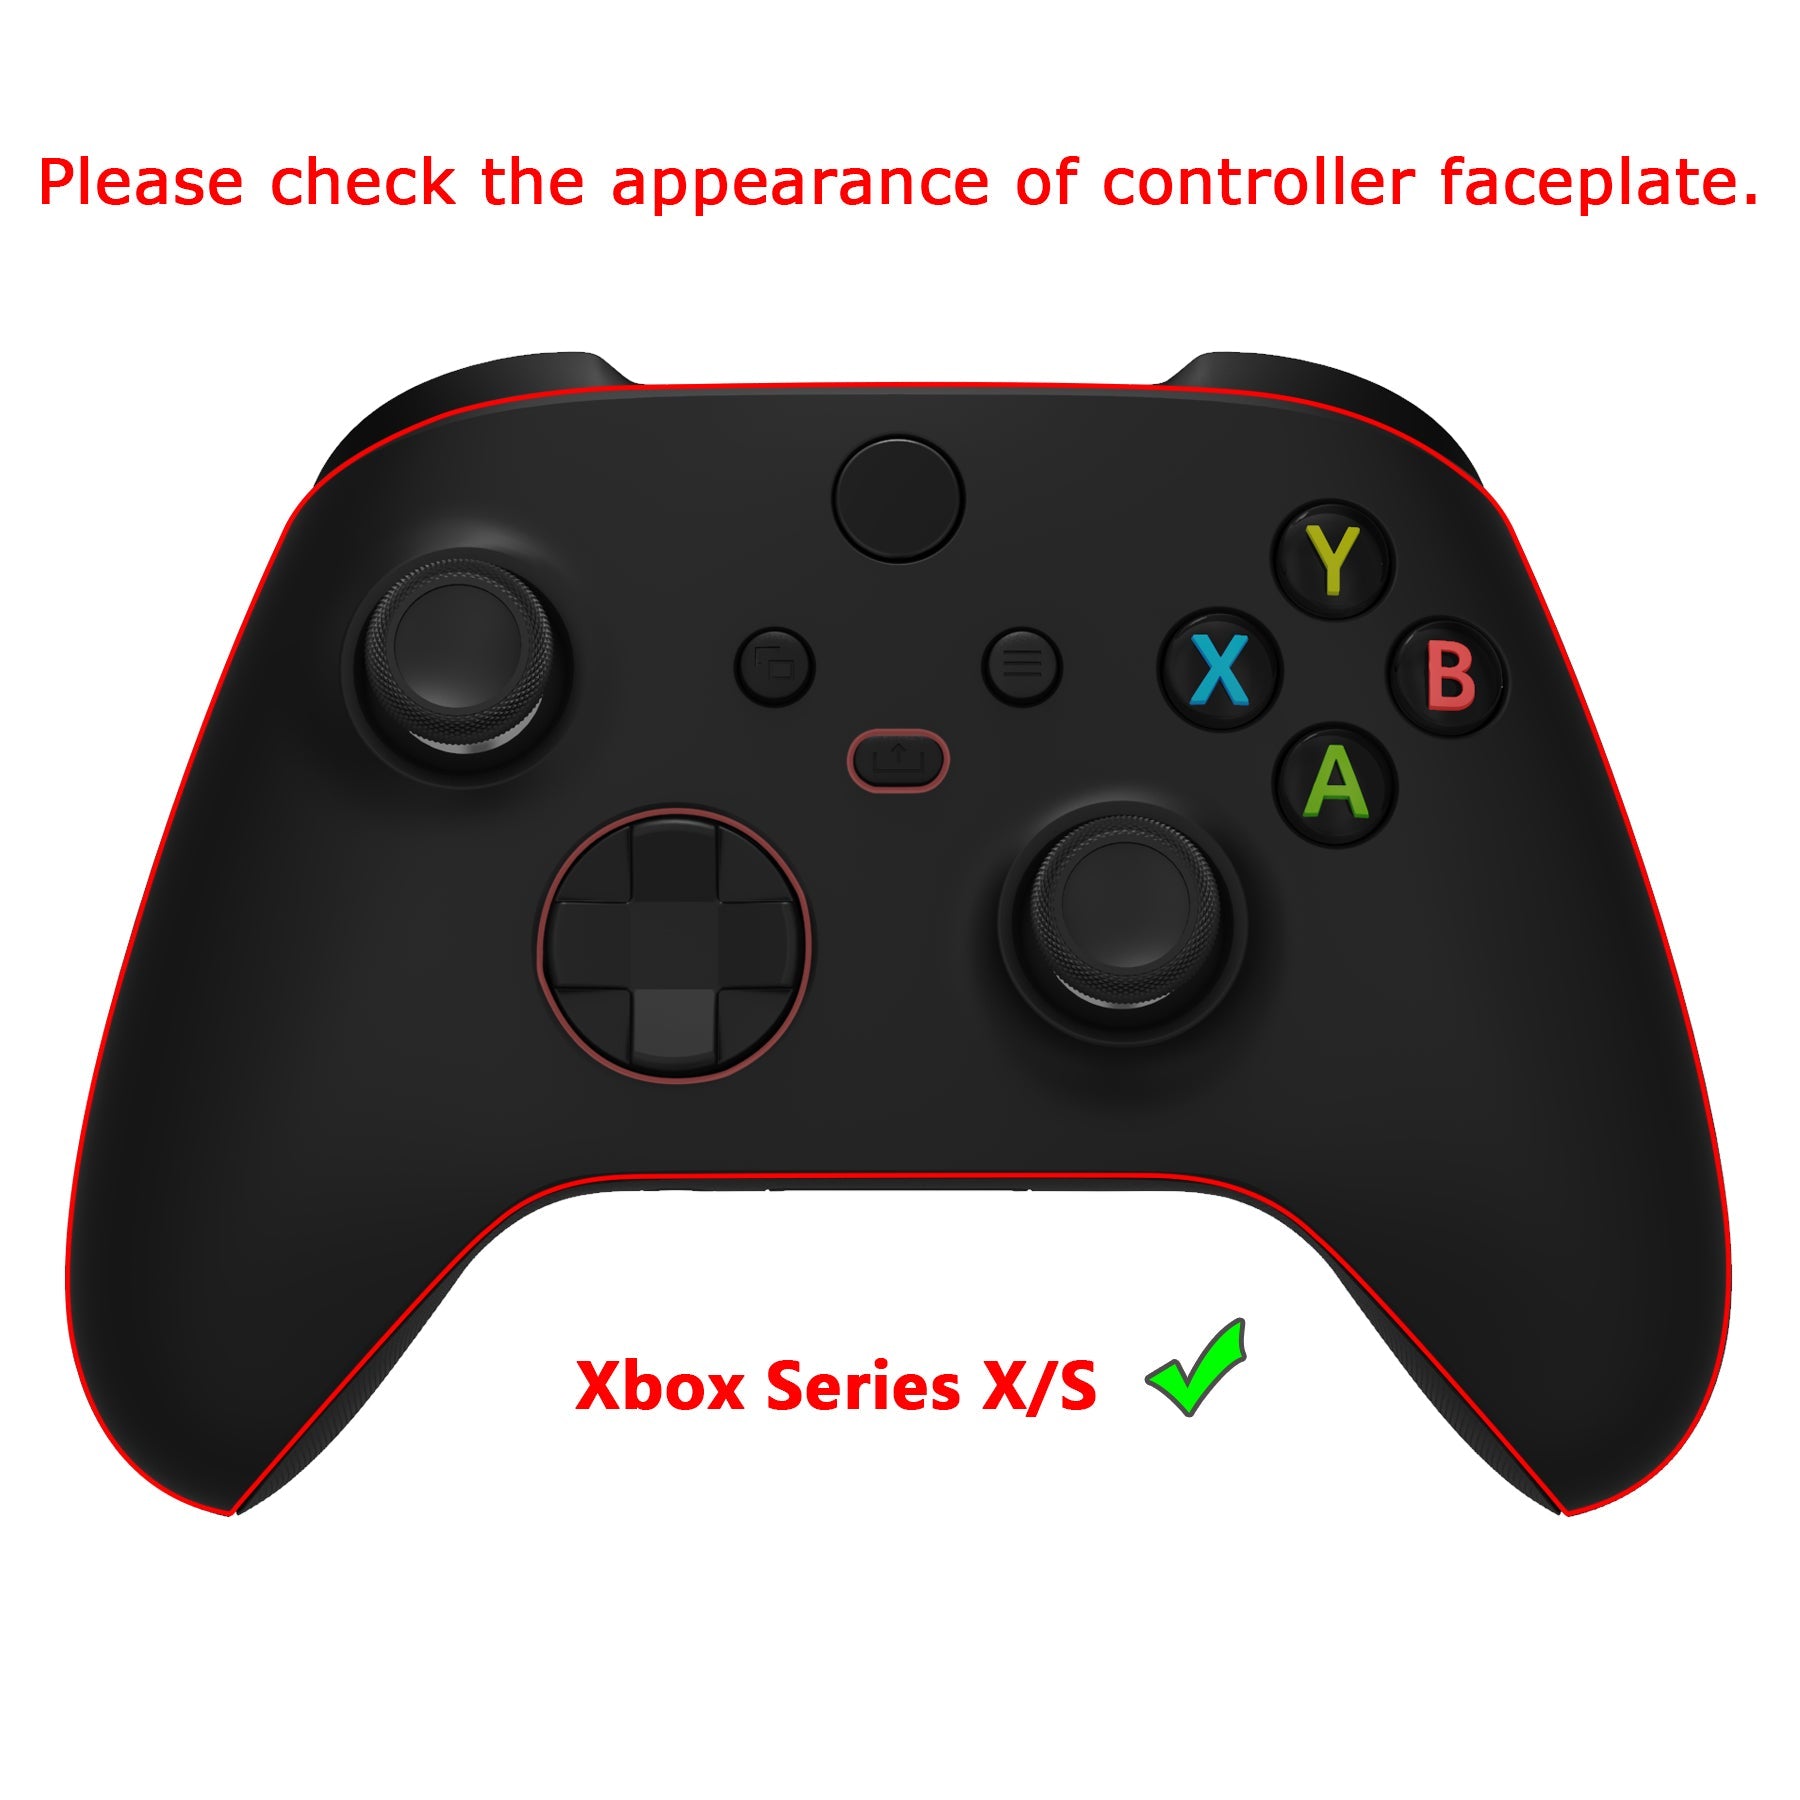 PlayVital Biohazard Anti-Skid Sweat-Absorbent Controller Grip for Xbox Series X/S Controller, Professional Textured Soft Rubber Pads Handle Grips for Xbox Series X/S Controller - X3PJ042 PlayVital